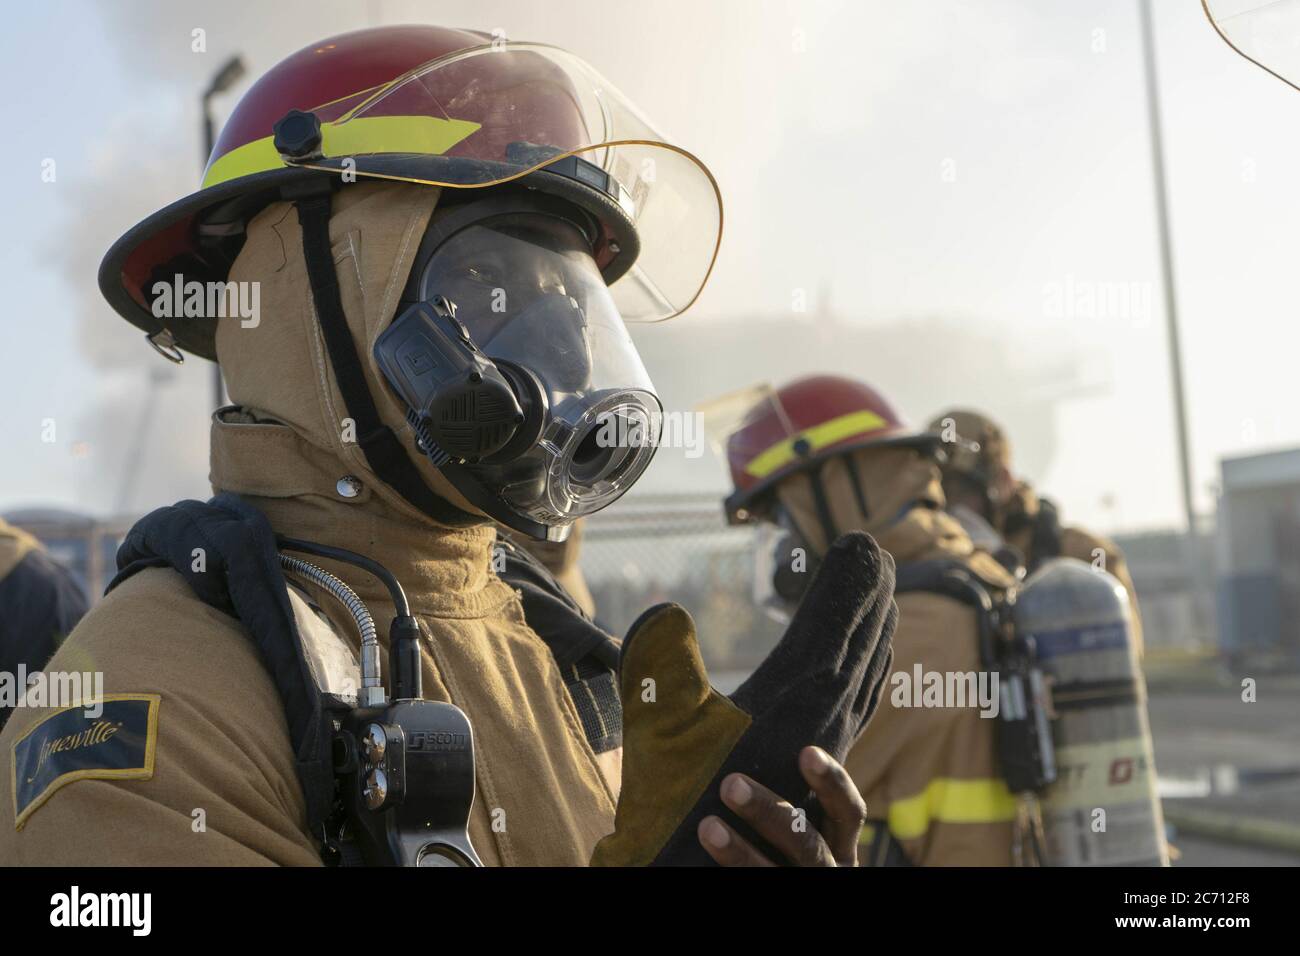 San Diego, United States. 13th July, 2020. U.S. Navy Sailors prepare to combat a fire aboard the USS Bonhomme Richard (LHD 6) on July 12, 2020. On the morning of July 12, a fire was called away aboard the ship while it was moored pier side at Naval Base San Diego. Base and shipboard firefighters responded to the fire. USS Bonhomme Richard is going through a maintenance availability, which began in 2018. Photo by MC3 Christina Ross/U.S. Navy/UPI Credit: UPI/Alamy Live News Stock Photo